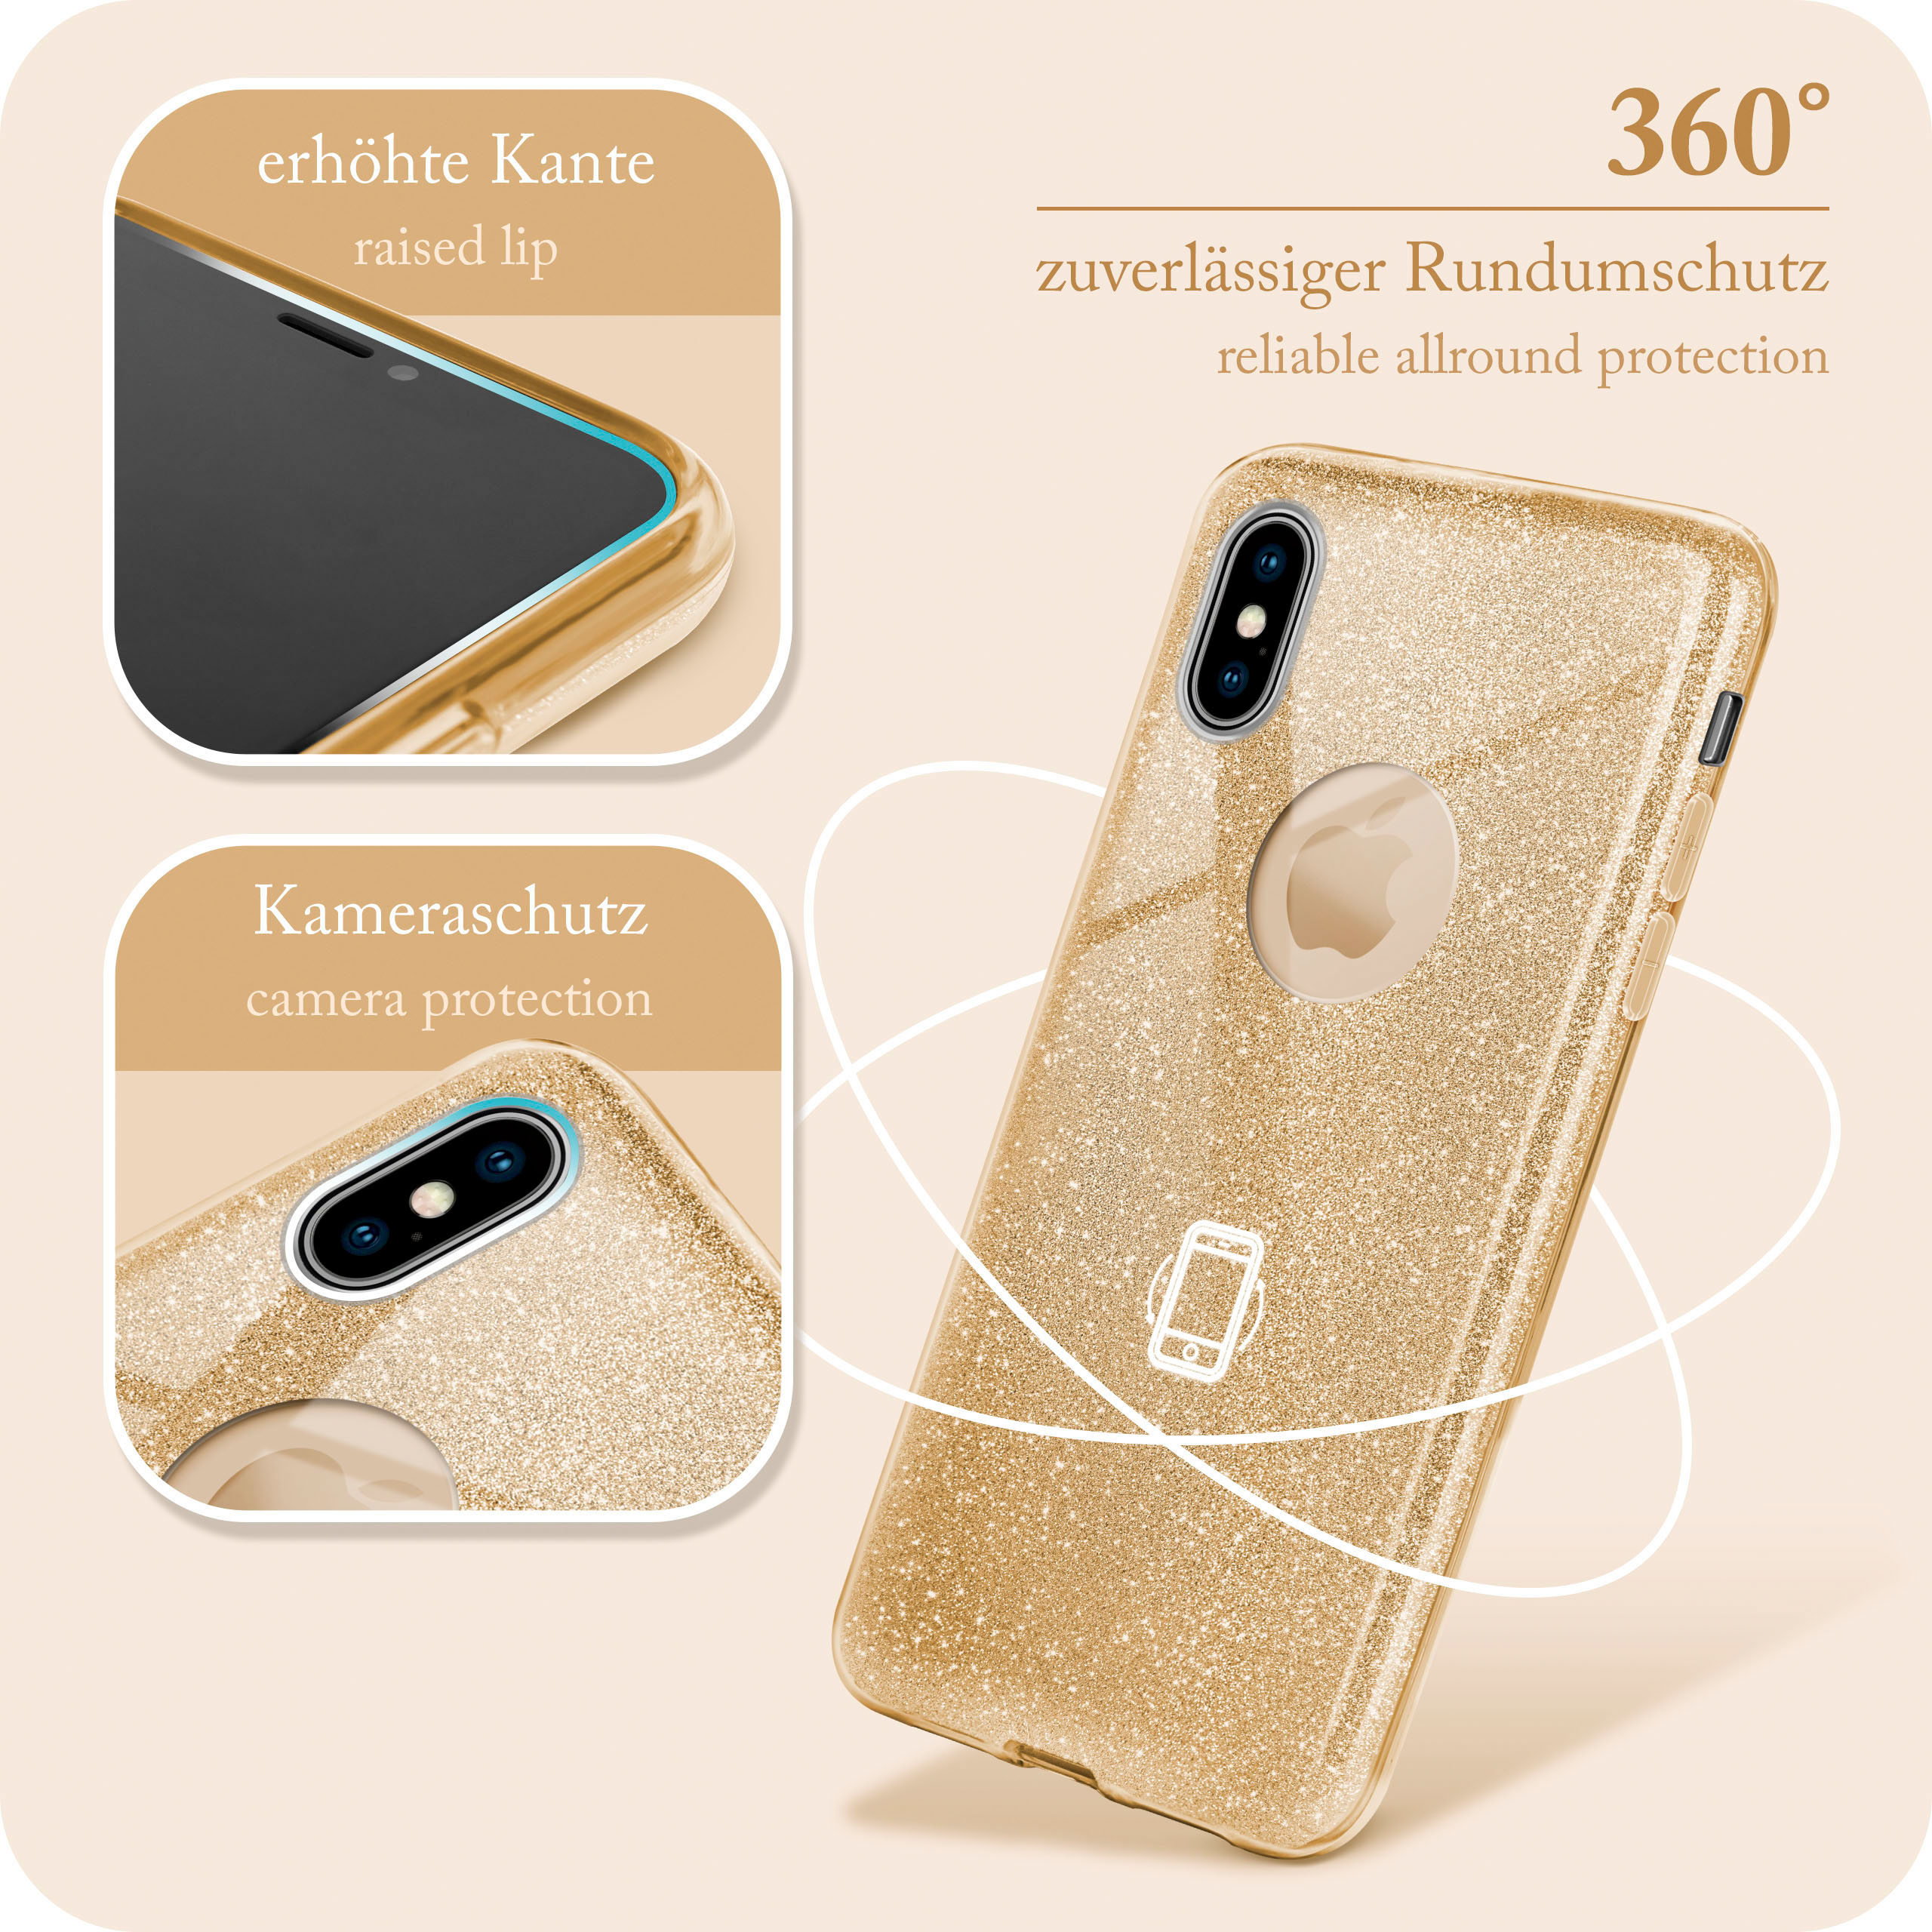 Backcover, Glitter X / Case, iPhone XS, Shine Apple, Gold - ONEFLOW iPhone